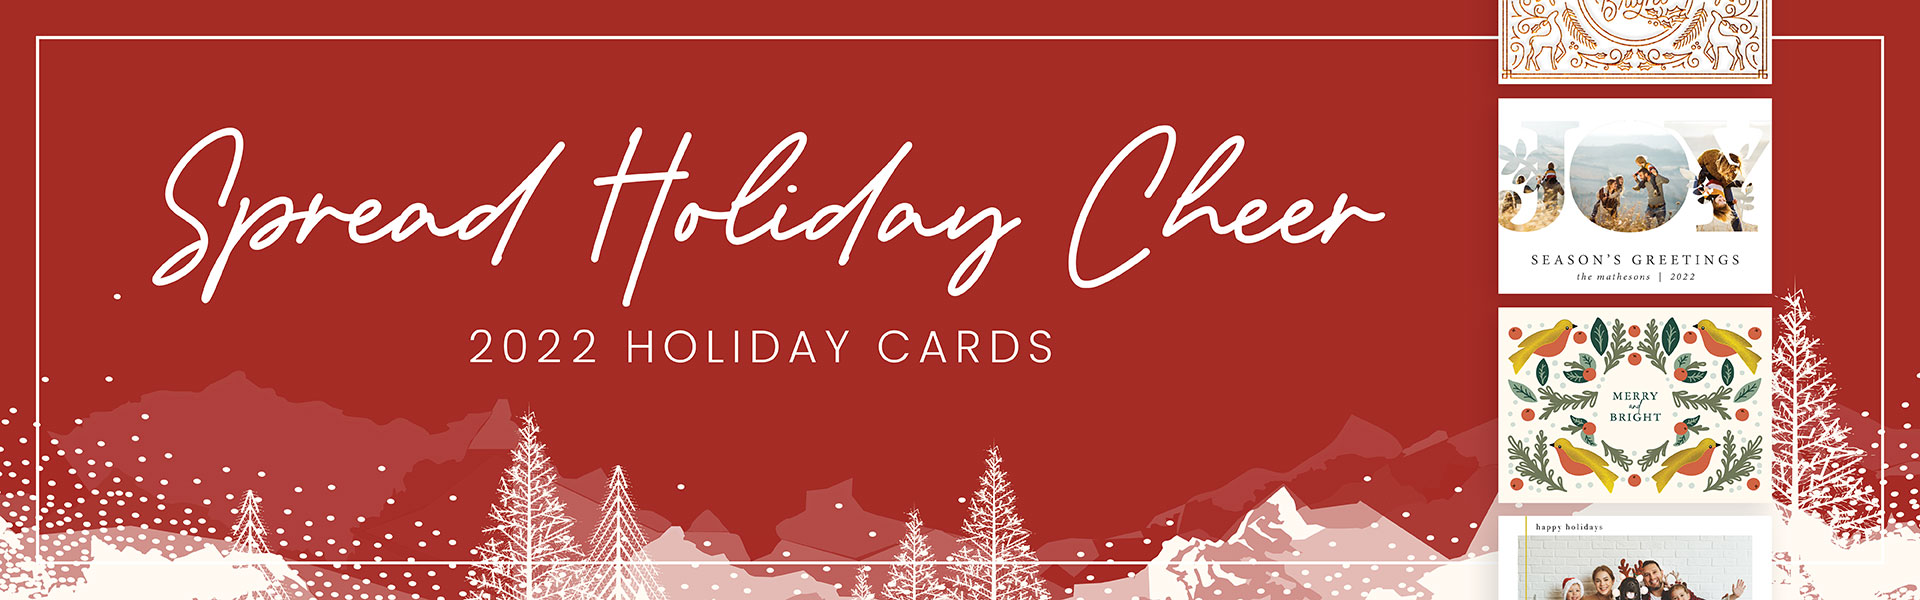 Spread Holiday Cheer - 2022 Holiday Cards, Family Photo Cards and Christmas Cards,